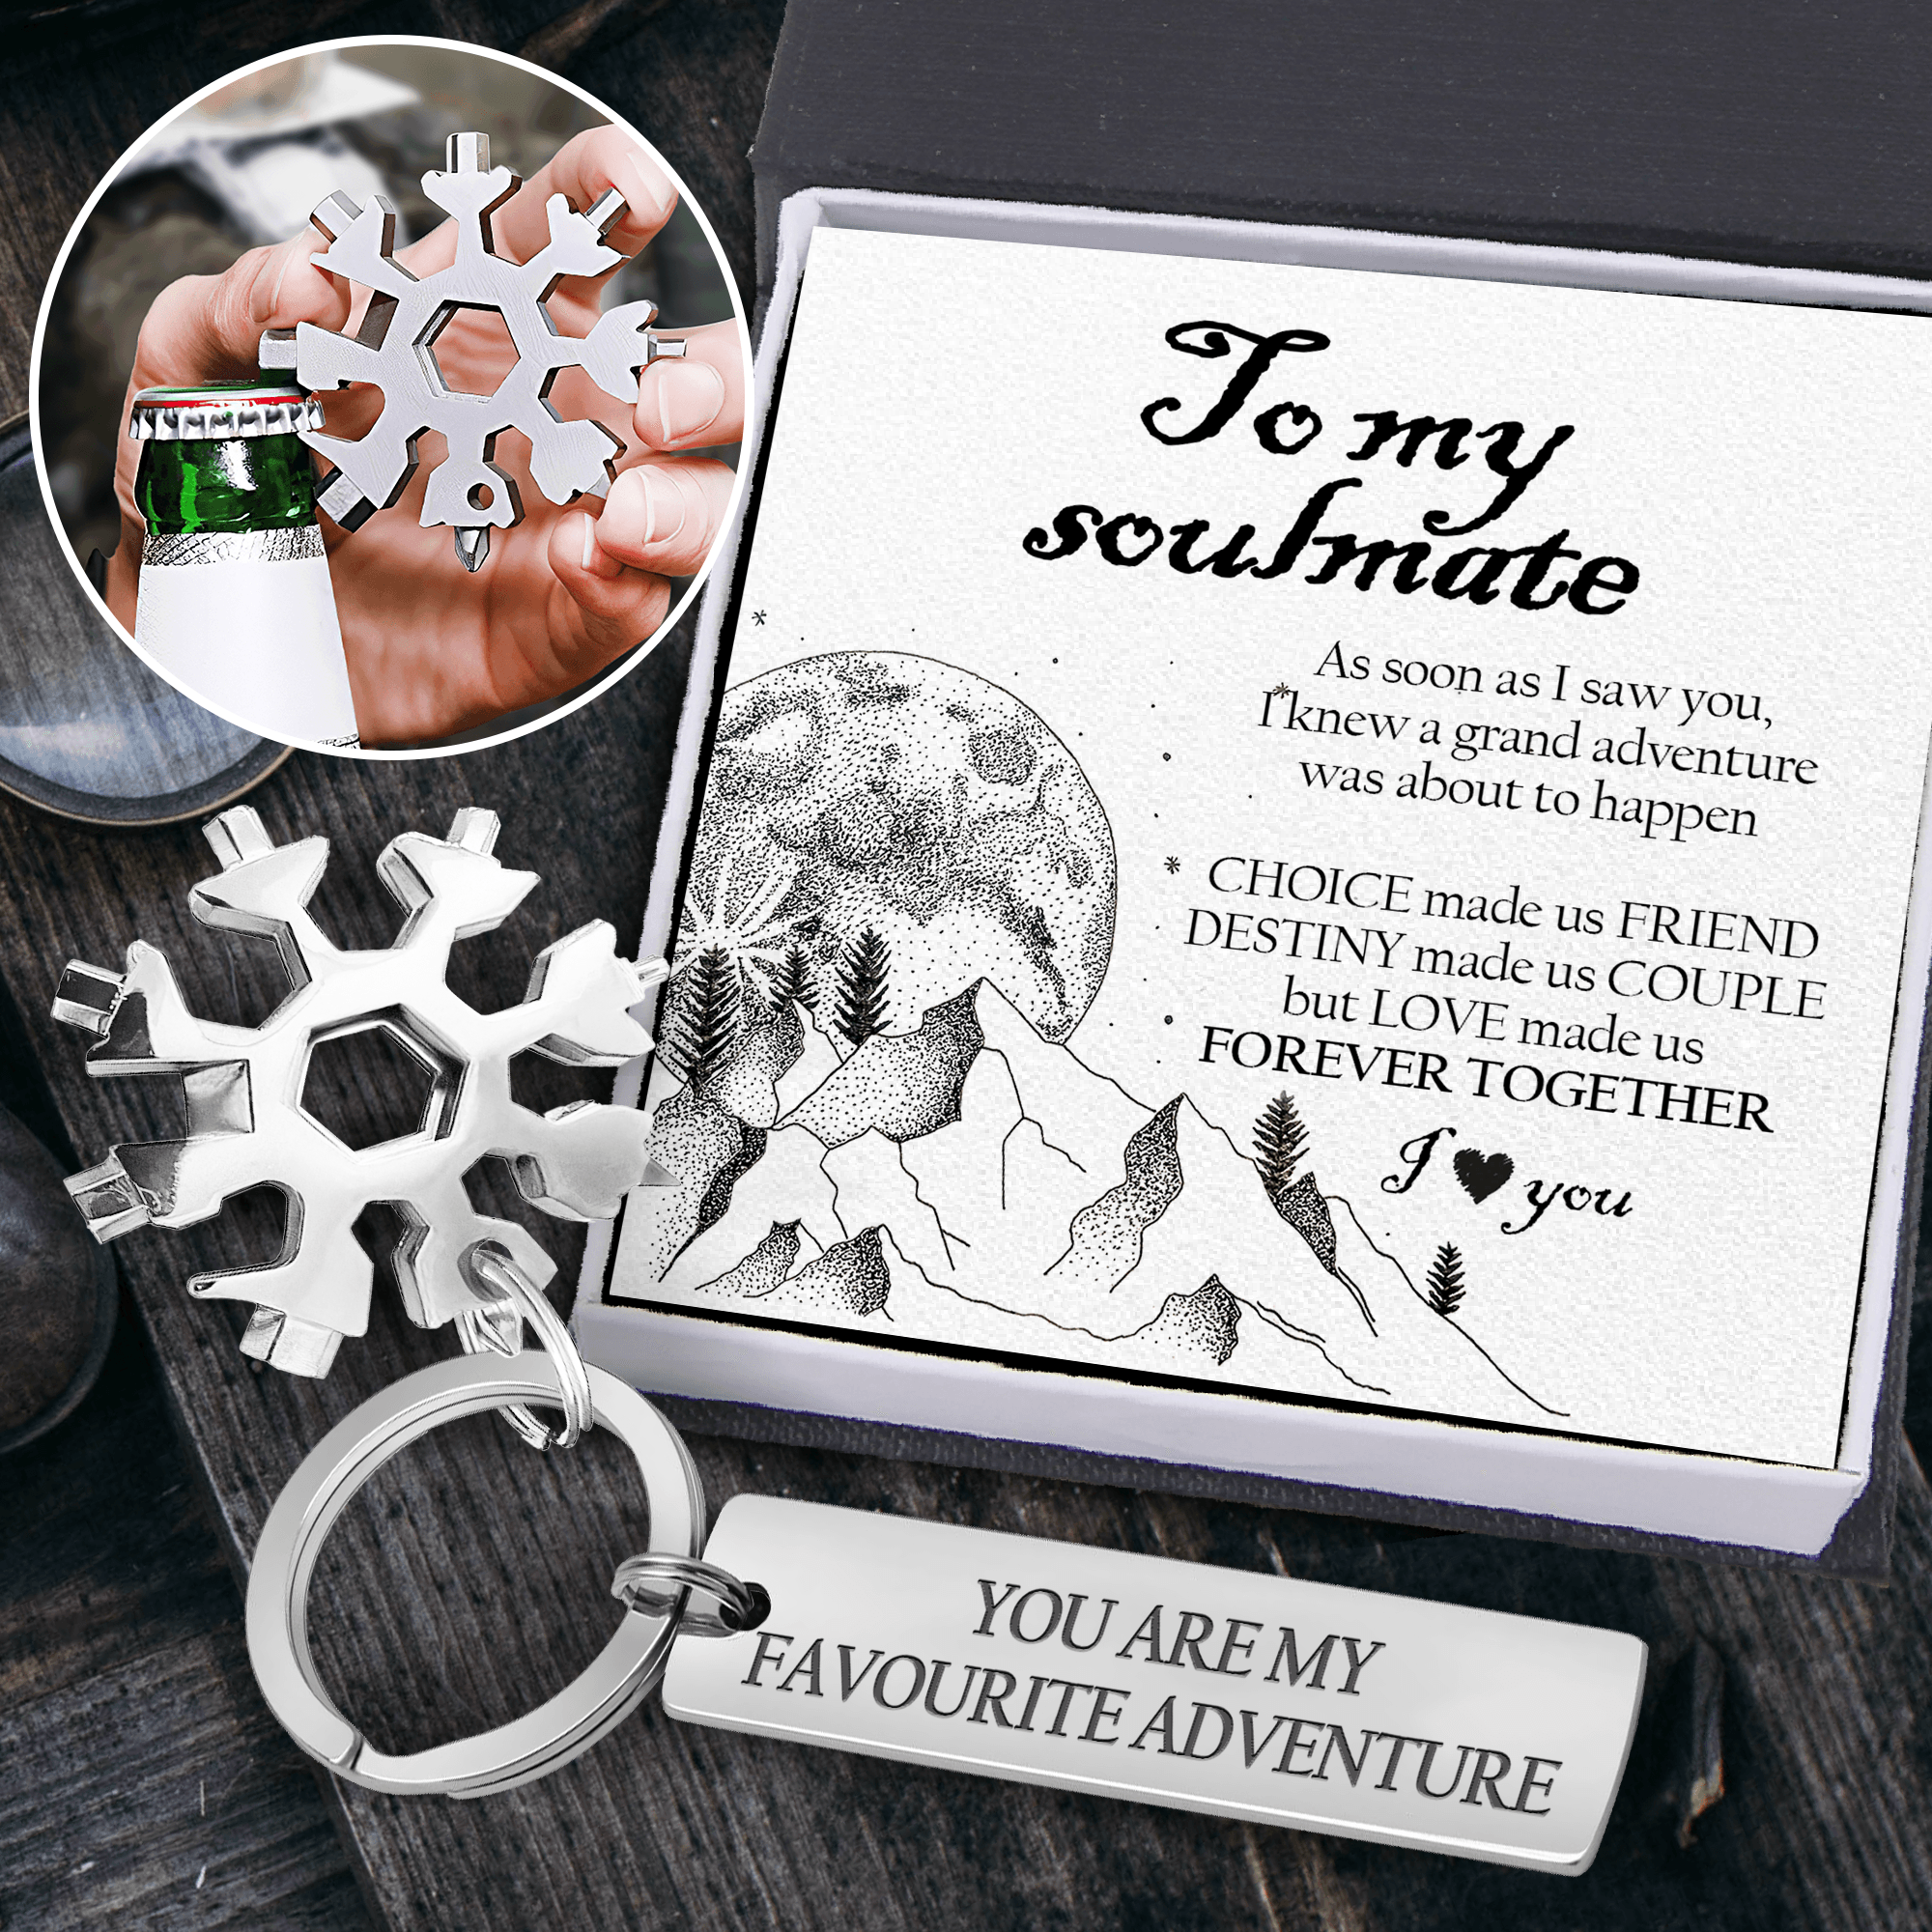 Outdoor Multitool Keychain - Hiking - To My Soulmate - Love Made Us Forever Together - Augktb13002 - Gifts Holder